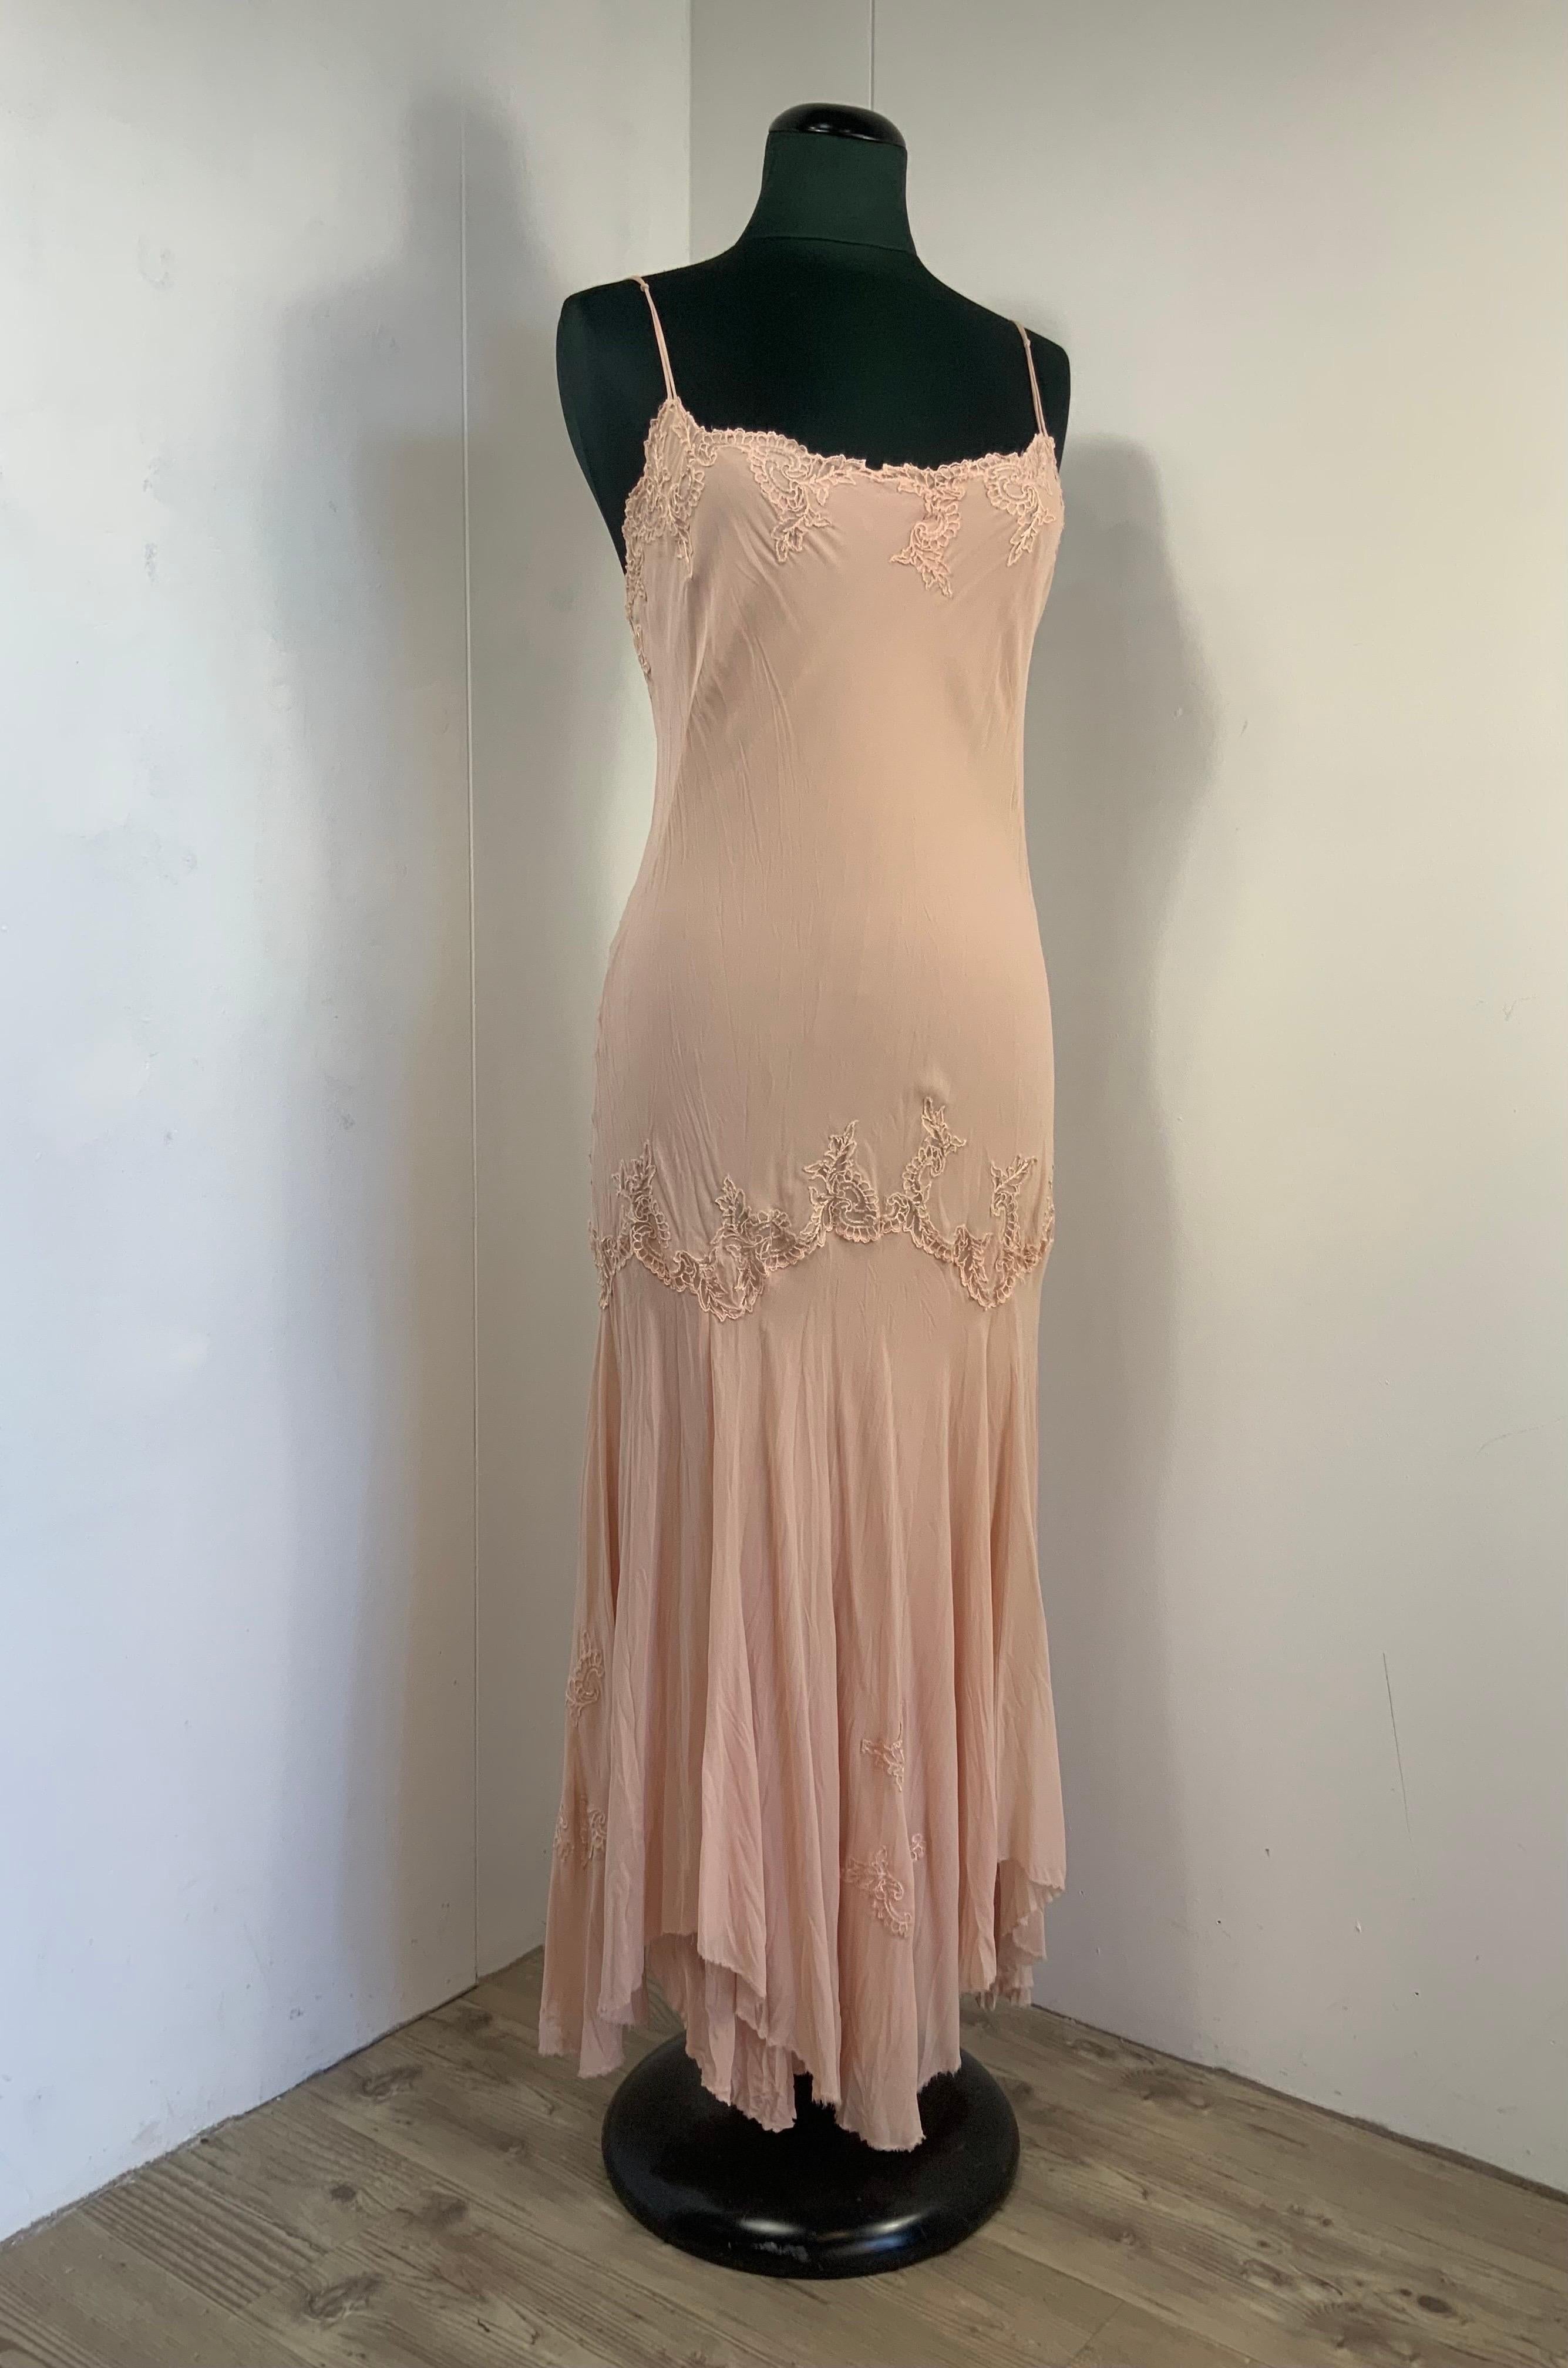 ERMANNO SCERVINO DRESS.
Made of 100% silk. Lined.
Italian size 44 but fits smaller
Bust 44cm
Waist 38 cm
Length 130 cm
Excellent general condition, with small marks on the bottom of the skirt as shown in the photos and some signs of normal use.